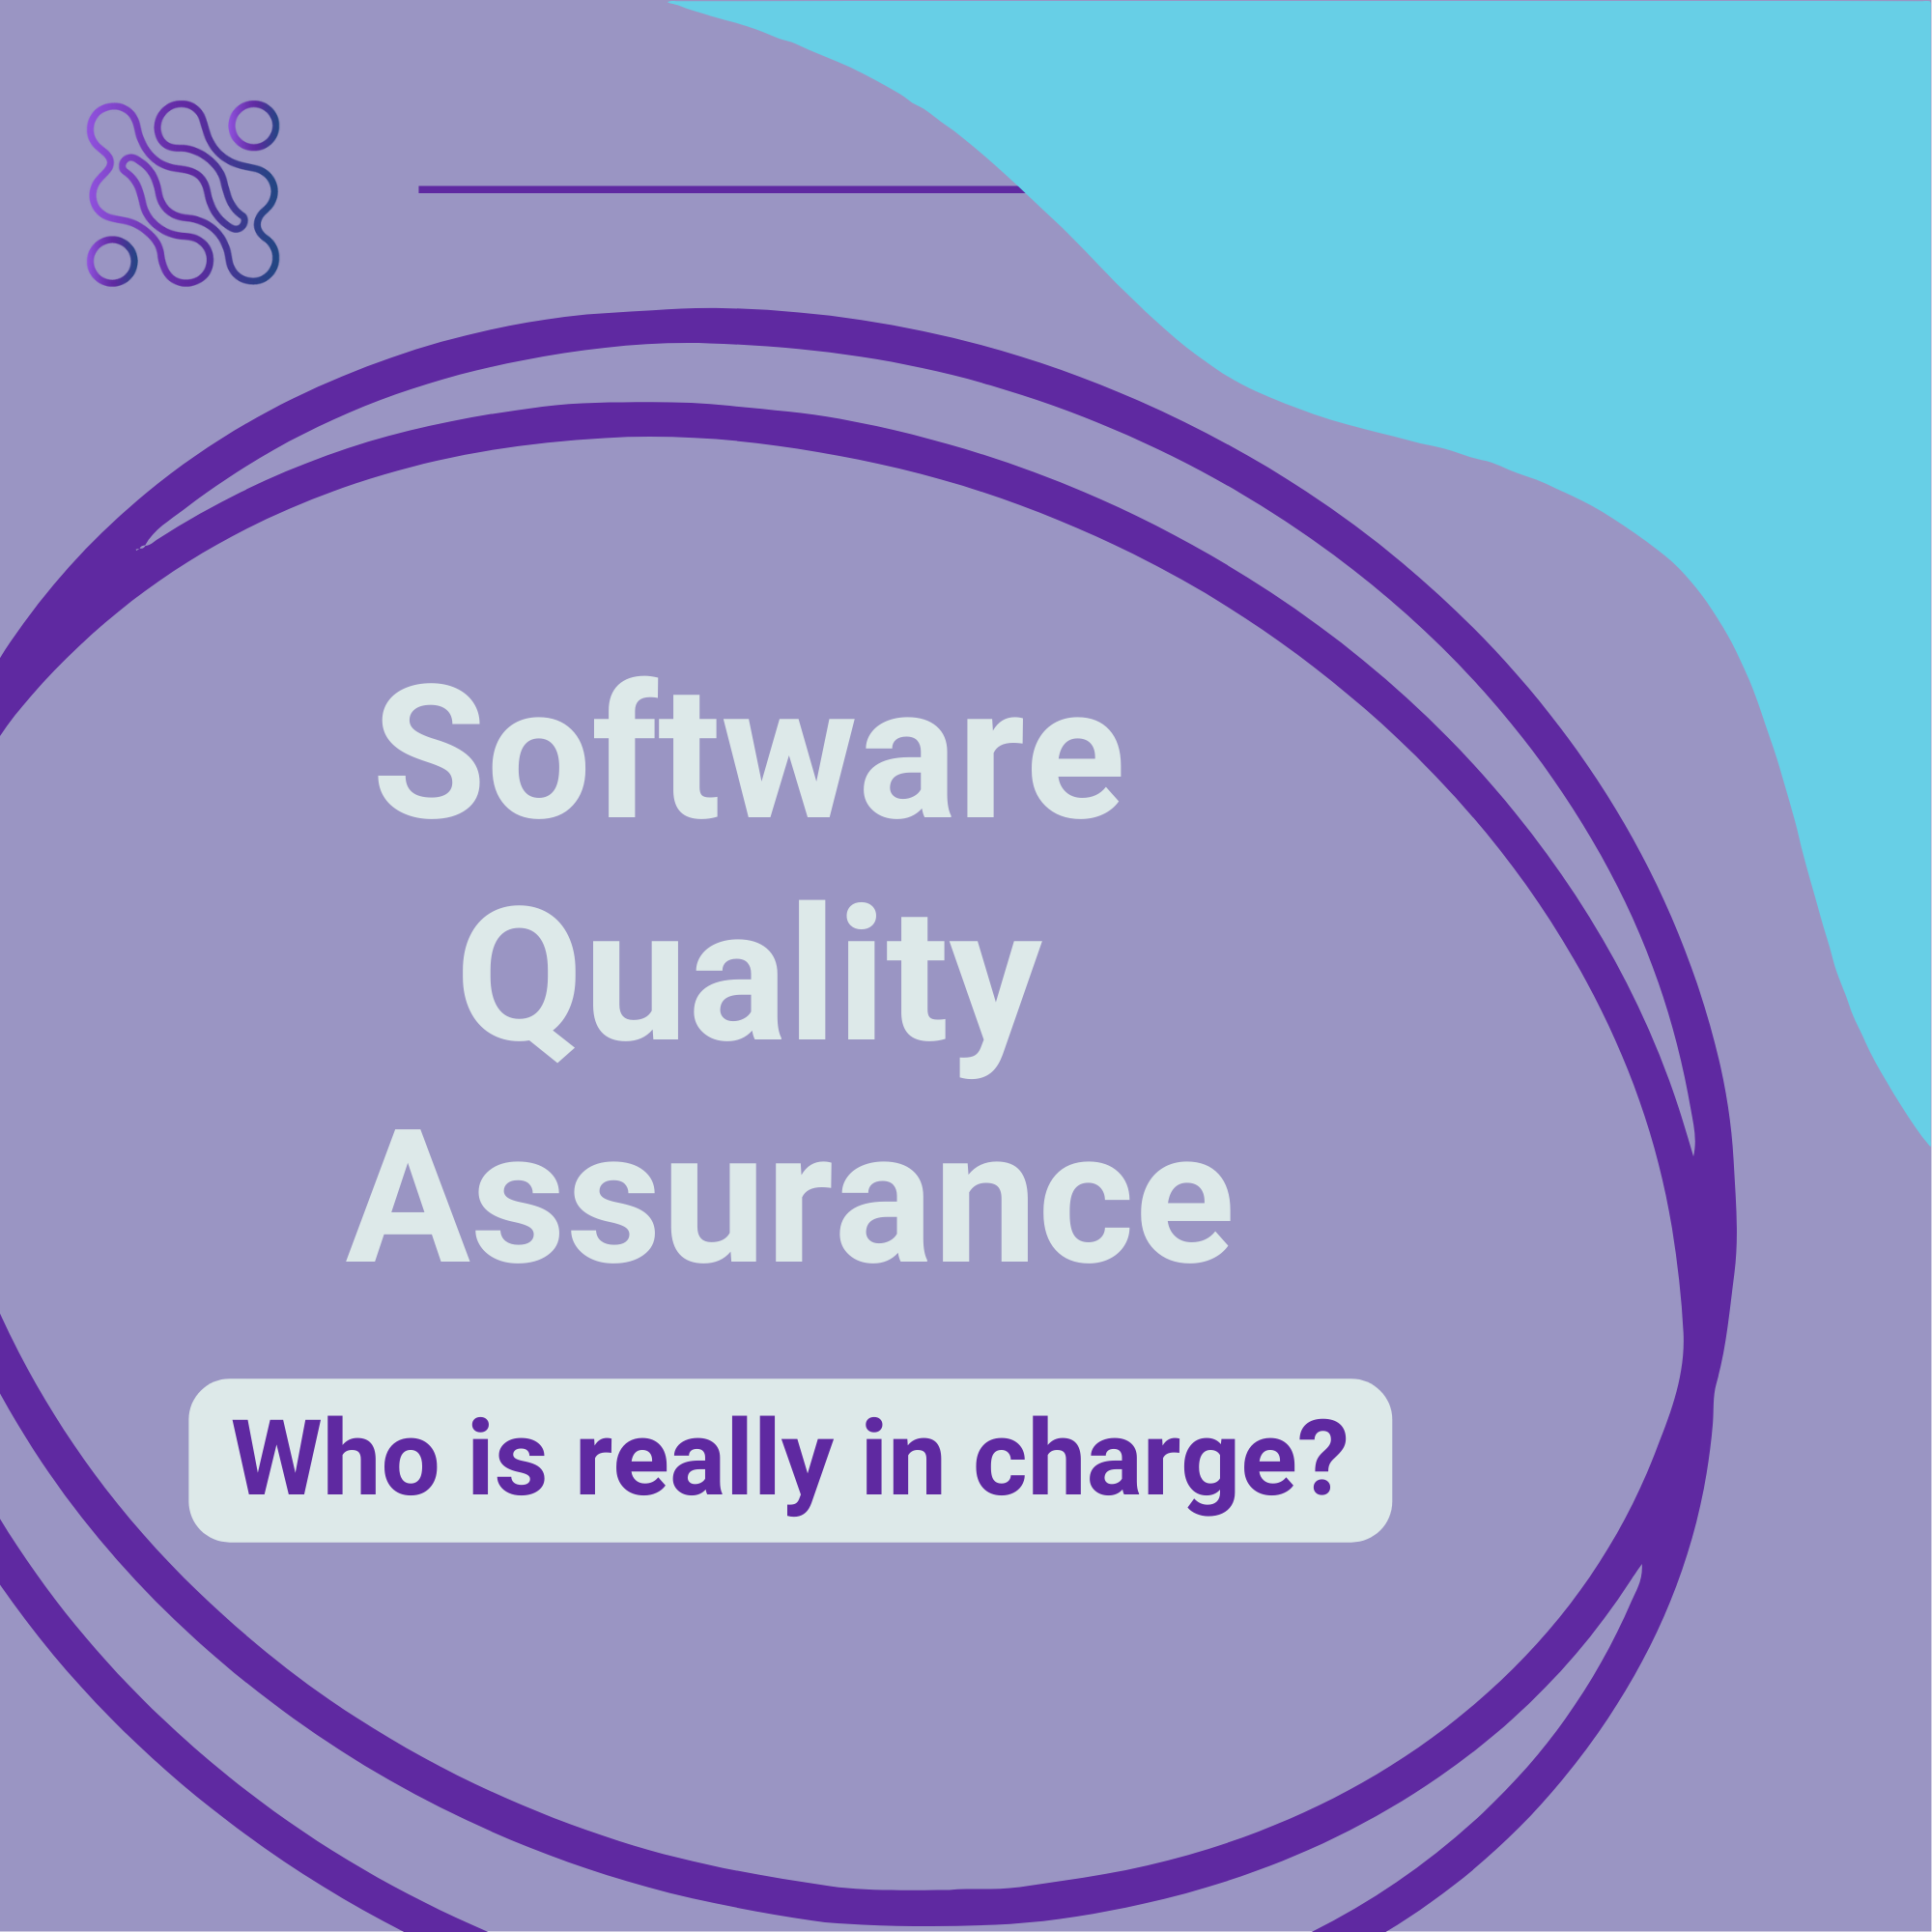 Who is really in charge of software quality assurance